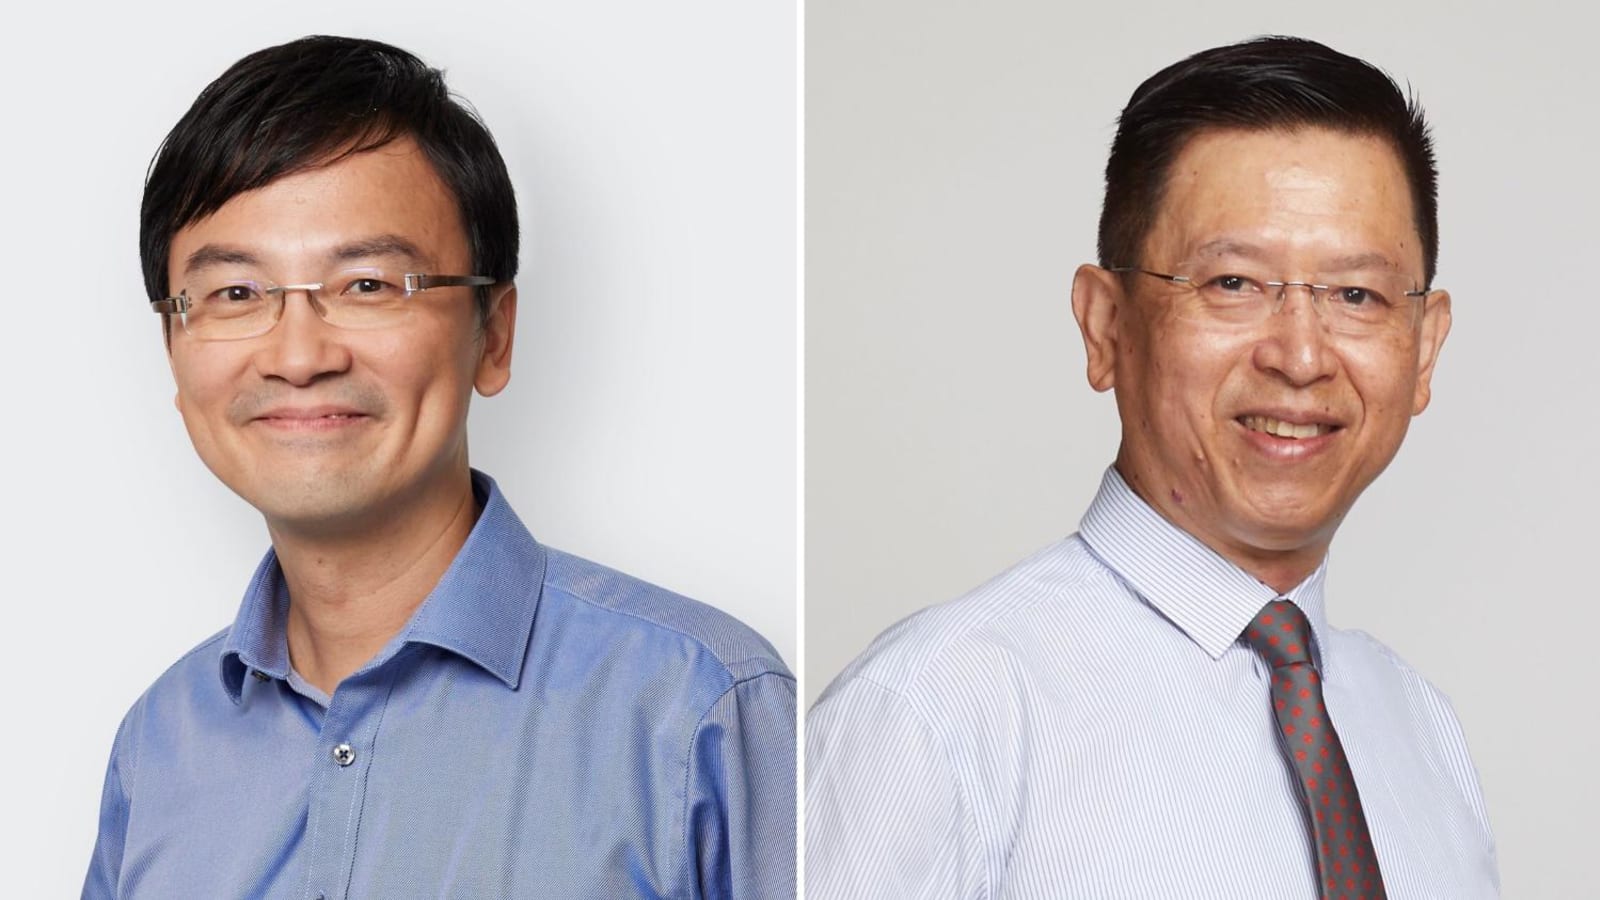 Ngien Hoon Ping named new CEO of SMRT, will take over from Neo Kian Hong on Aug 1